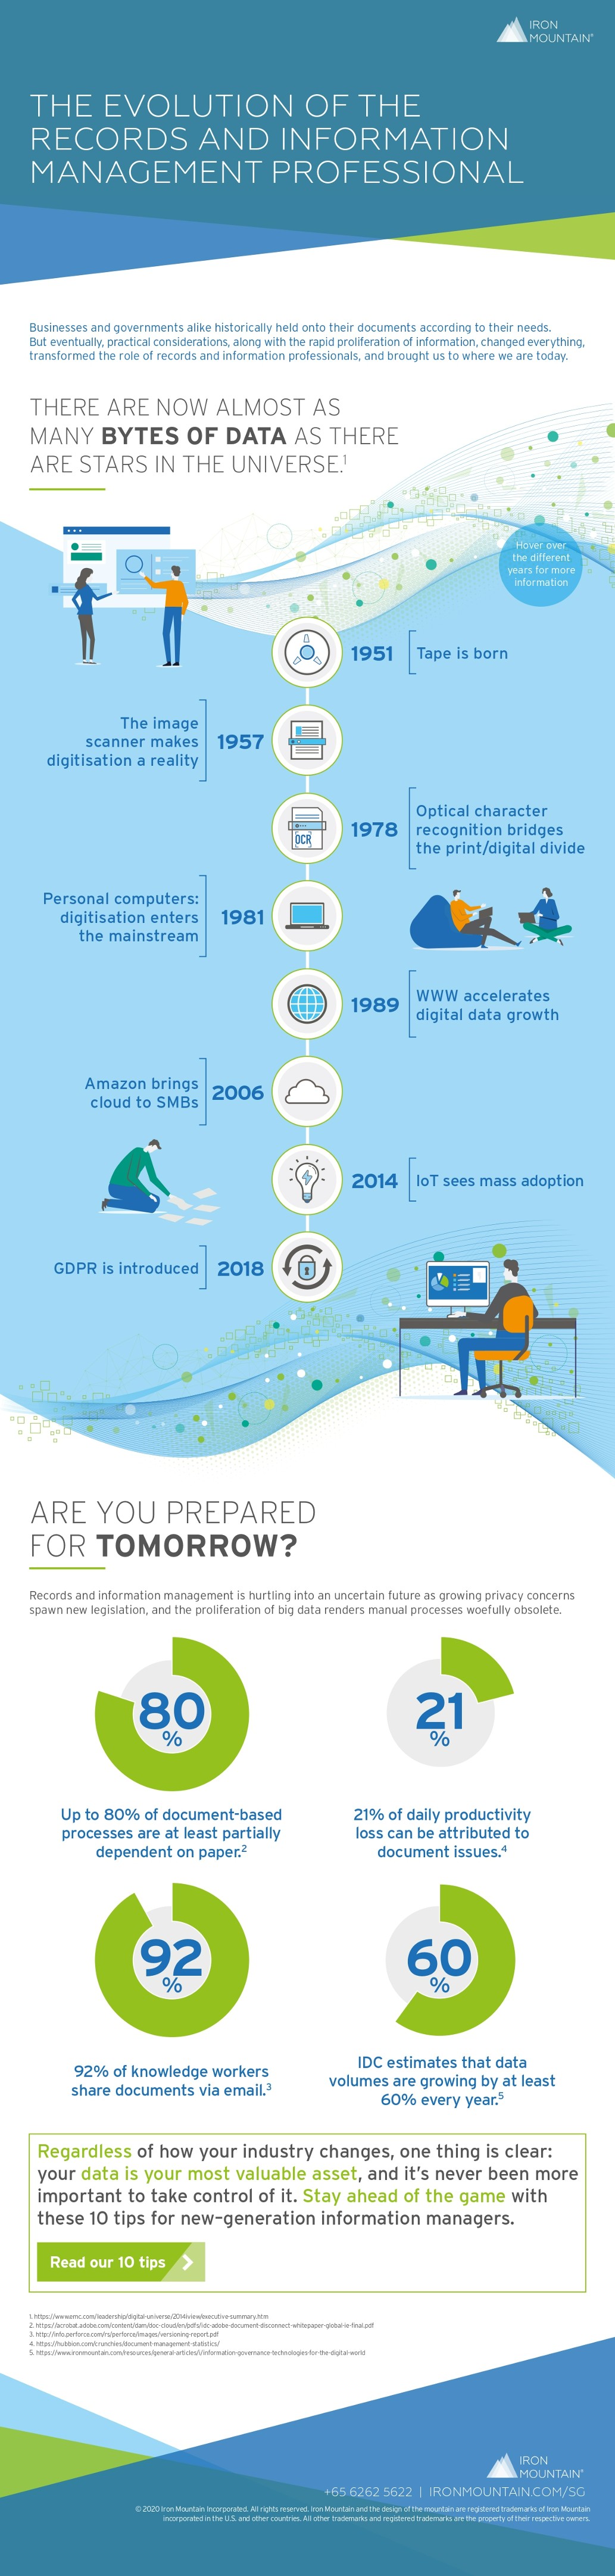 The Evolution Of The Records And Information Management Professional infographic